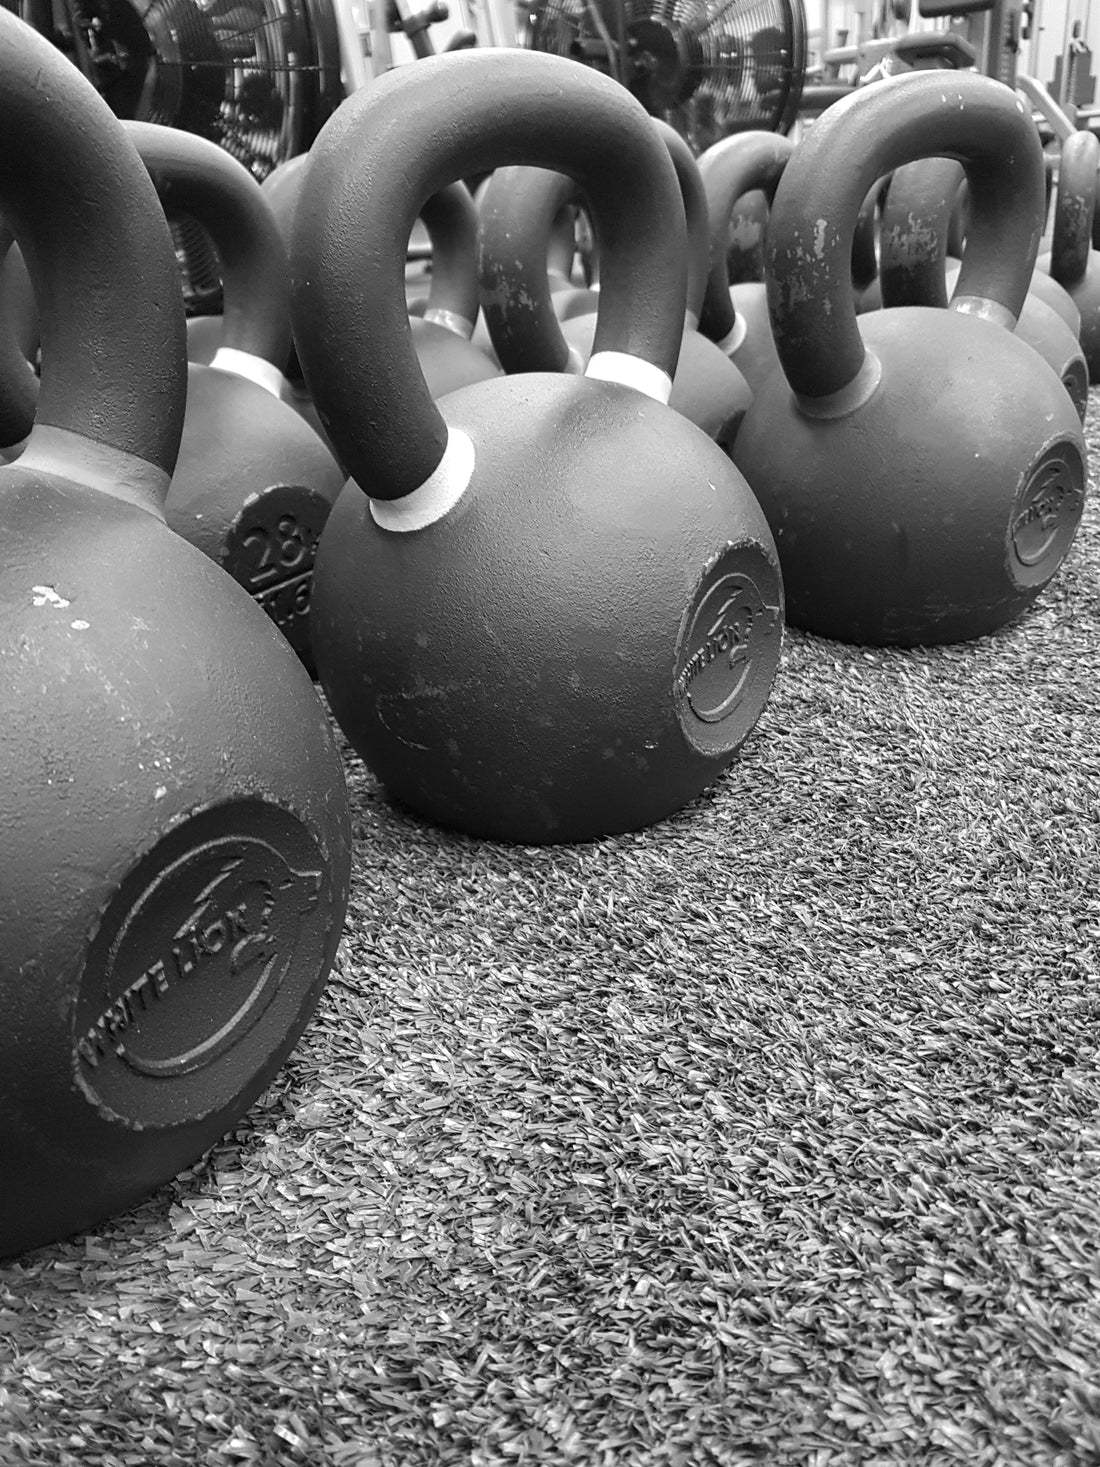 How to Choose Kettlebells: Choosing weight & should I buy pairs or singles?